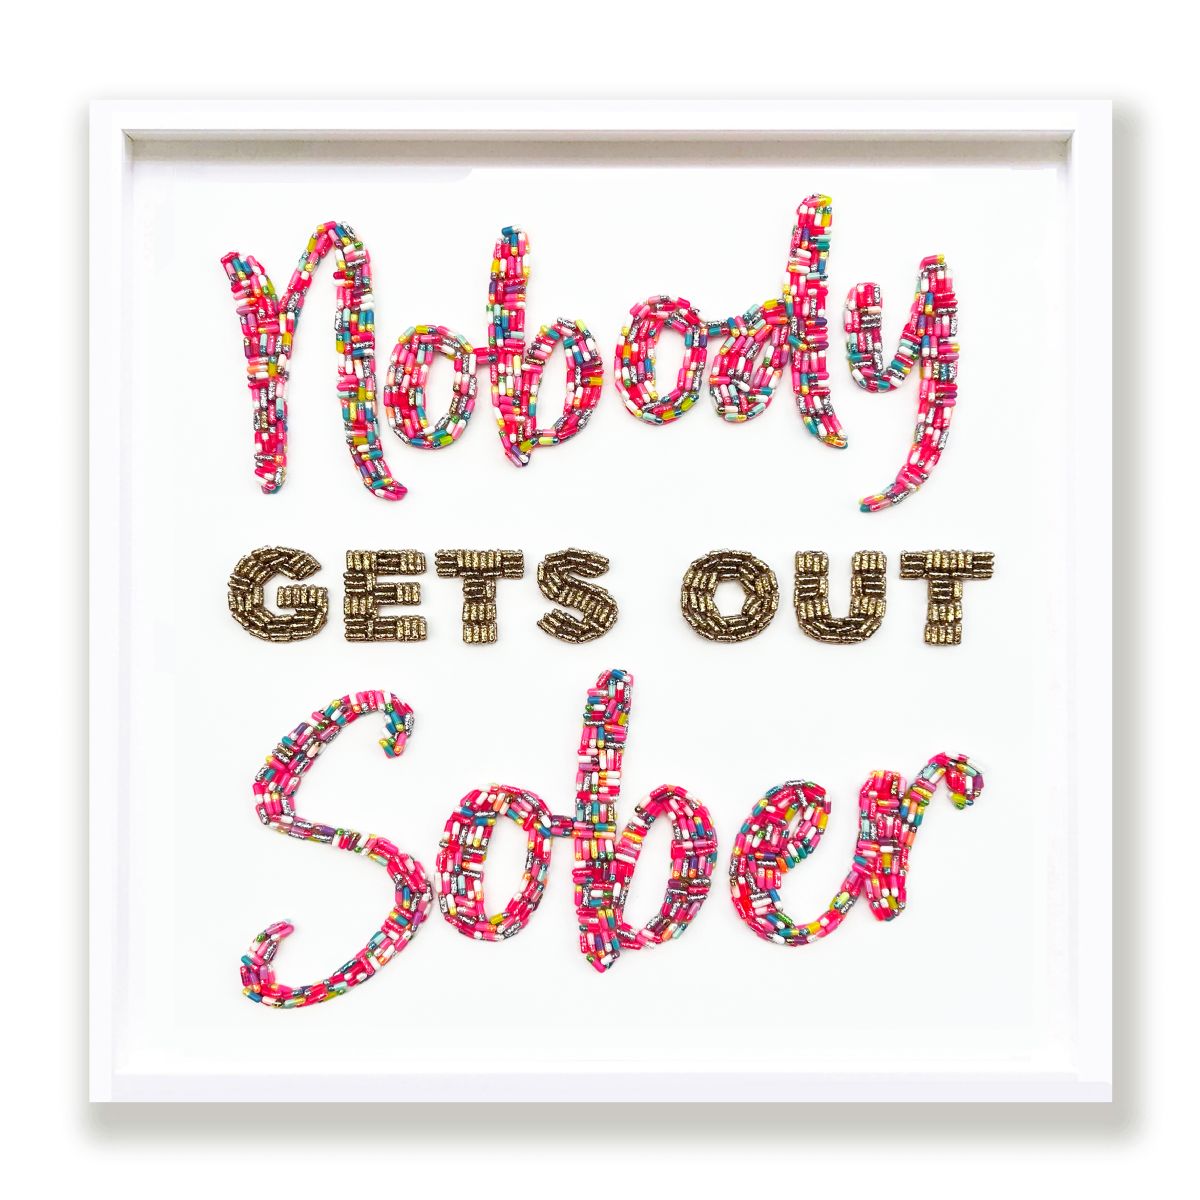 Nobody Gets Out Sober by Emma Gibbons